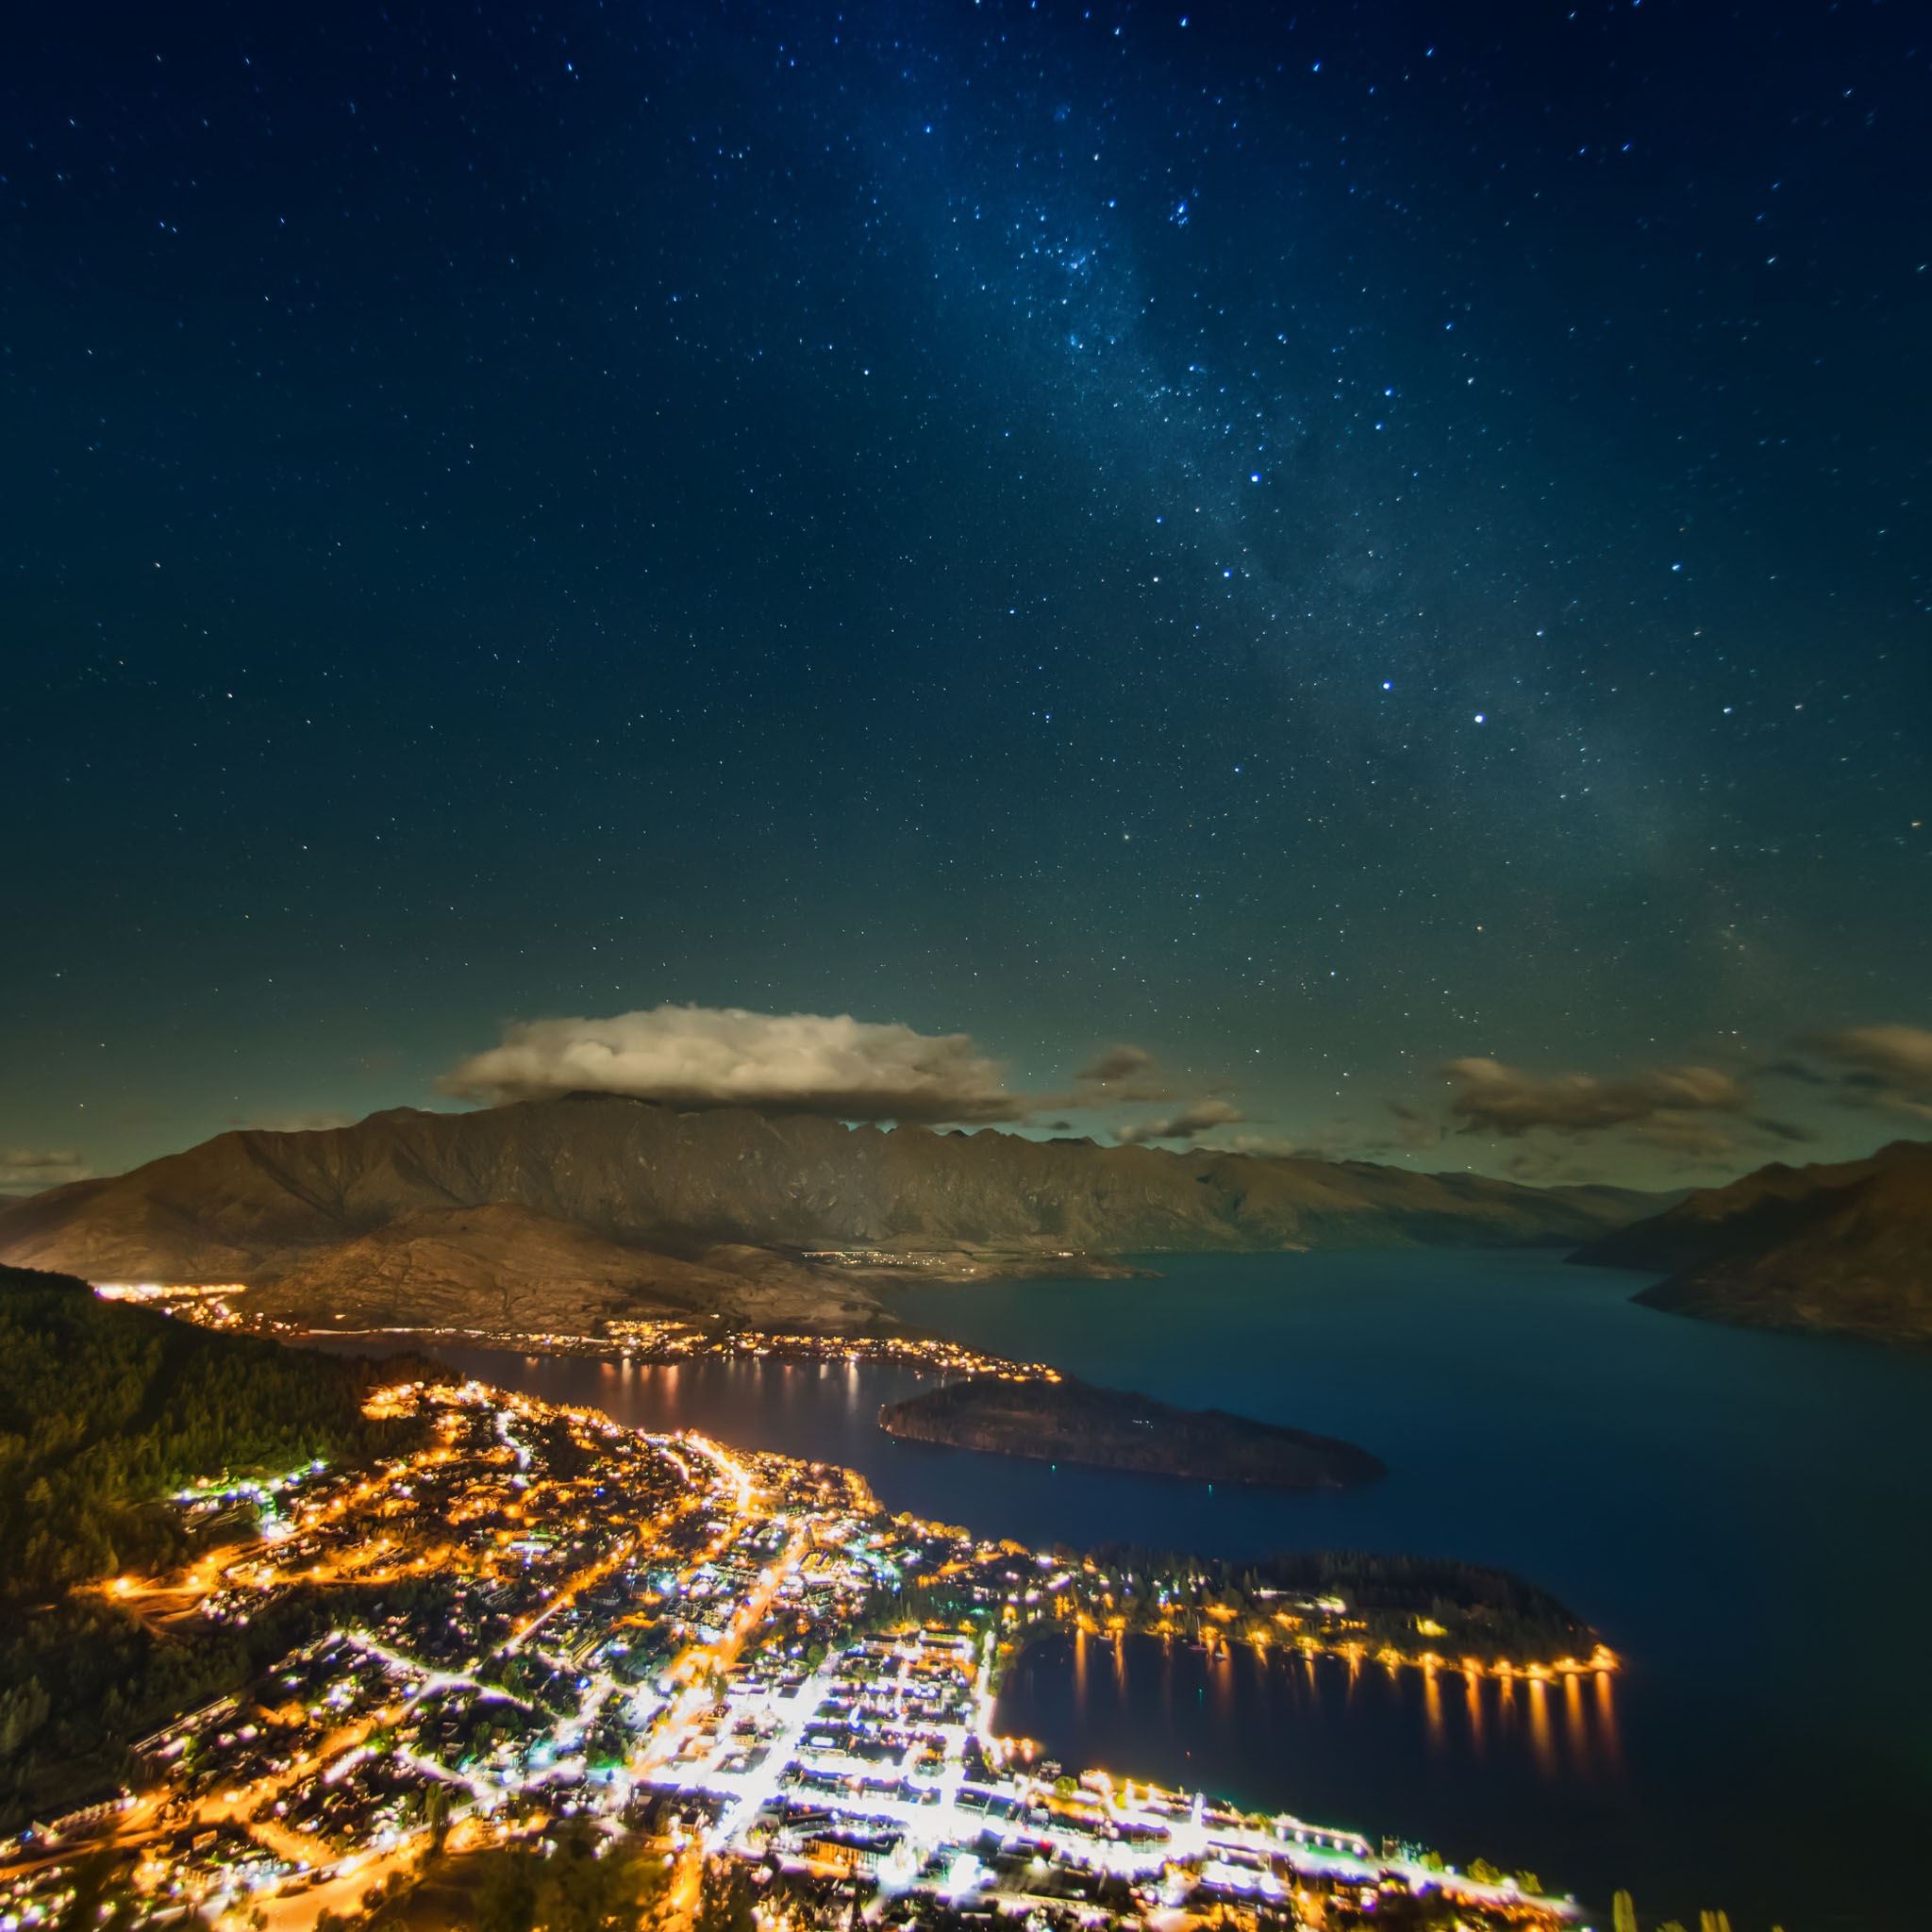 The Milky Way Over Queenstown Ipad Air Wallpapers Free Download